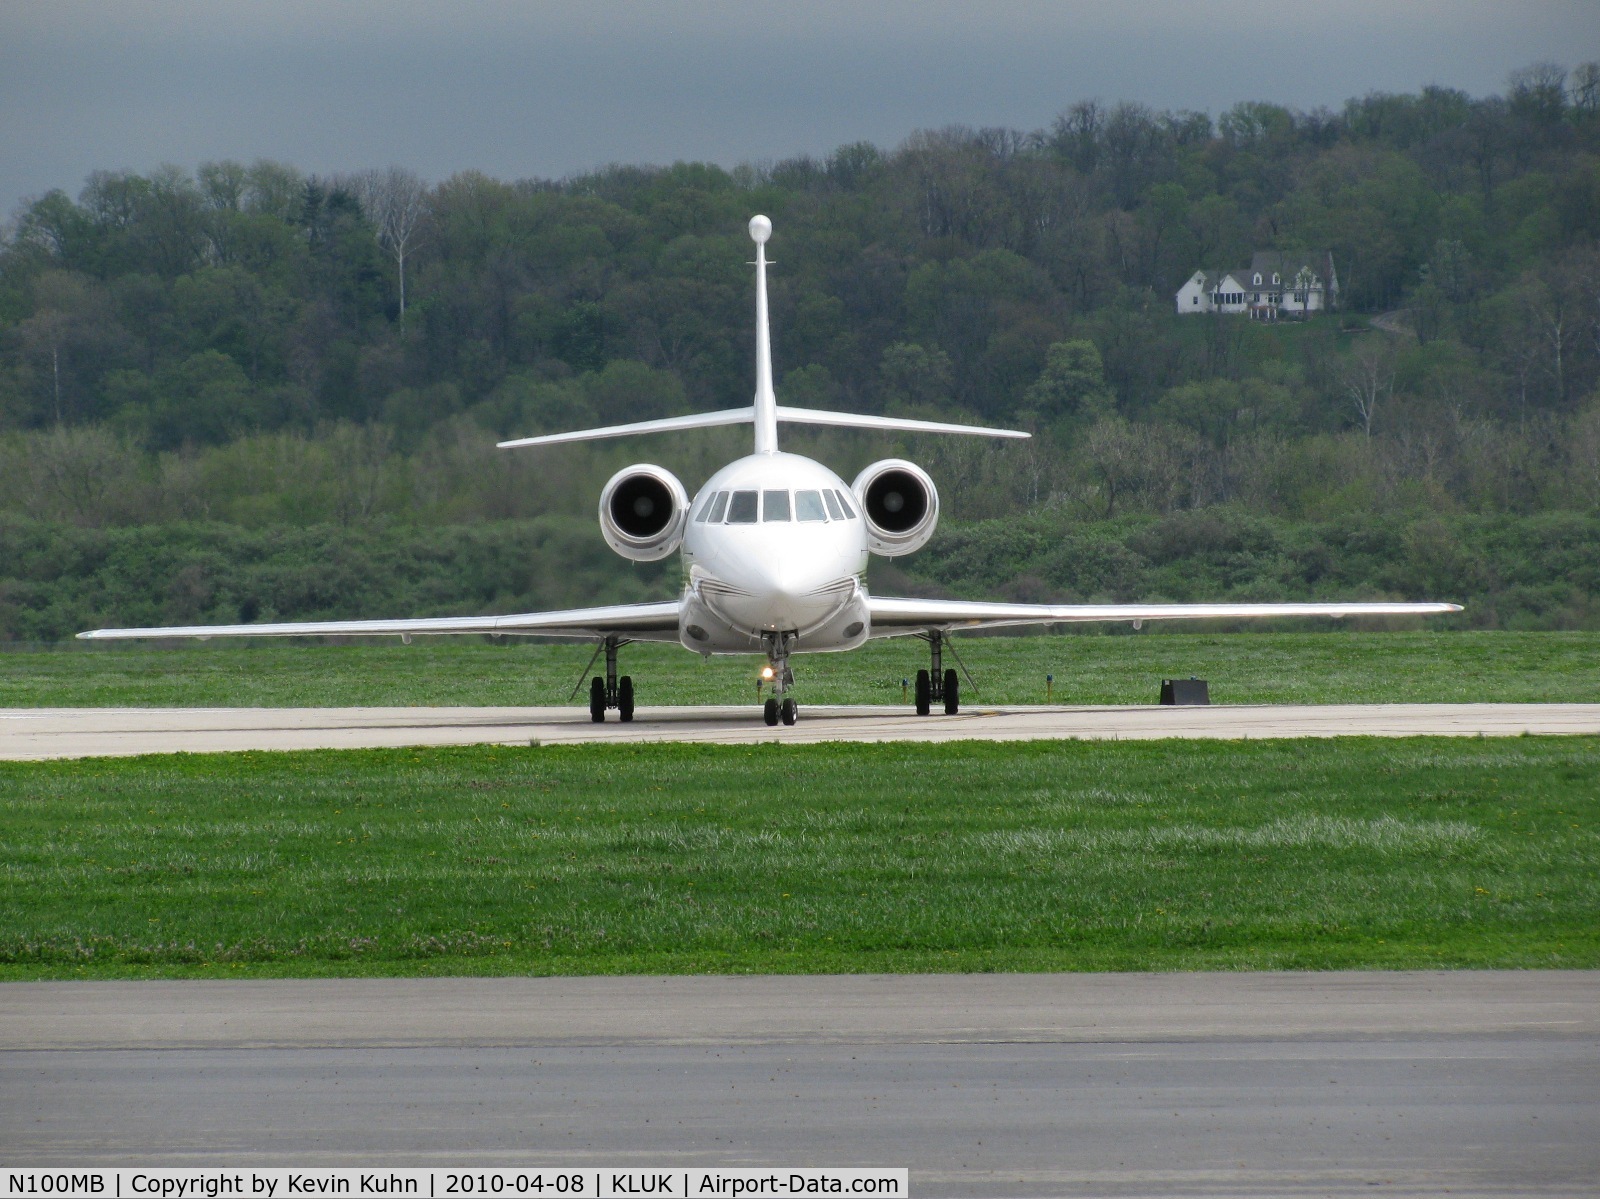 N100MB, 2005 Dassault Falcon 2000EX C/N 60, Falcon from the front